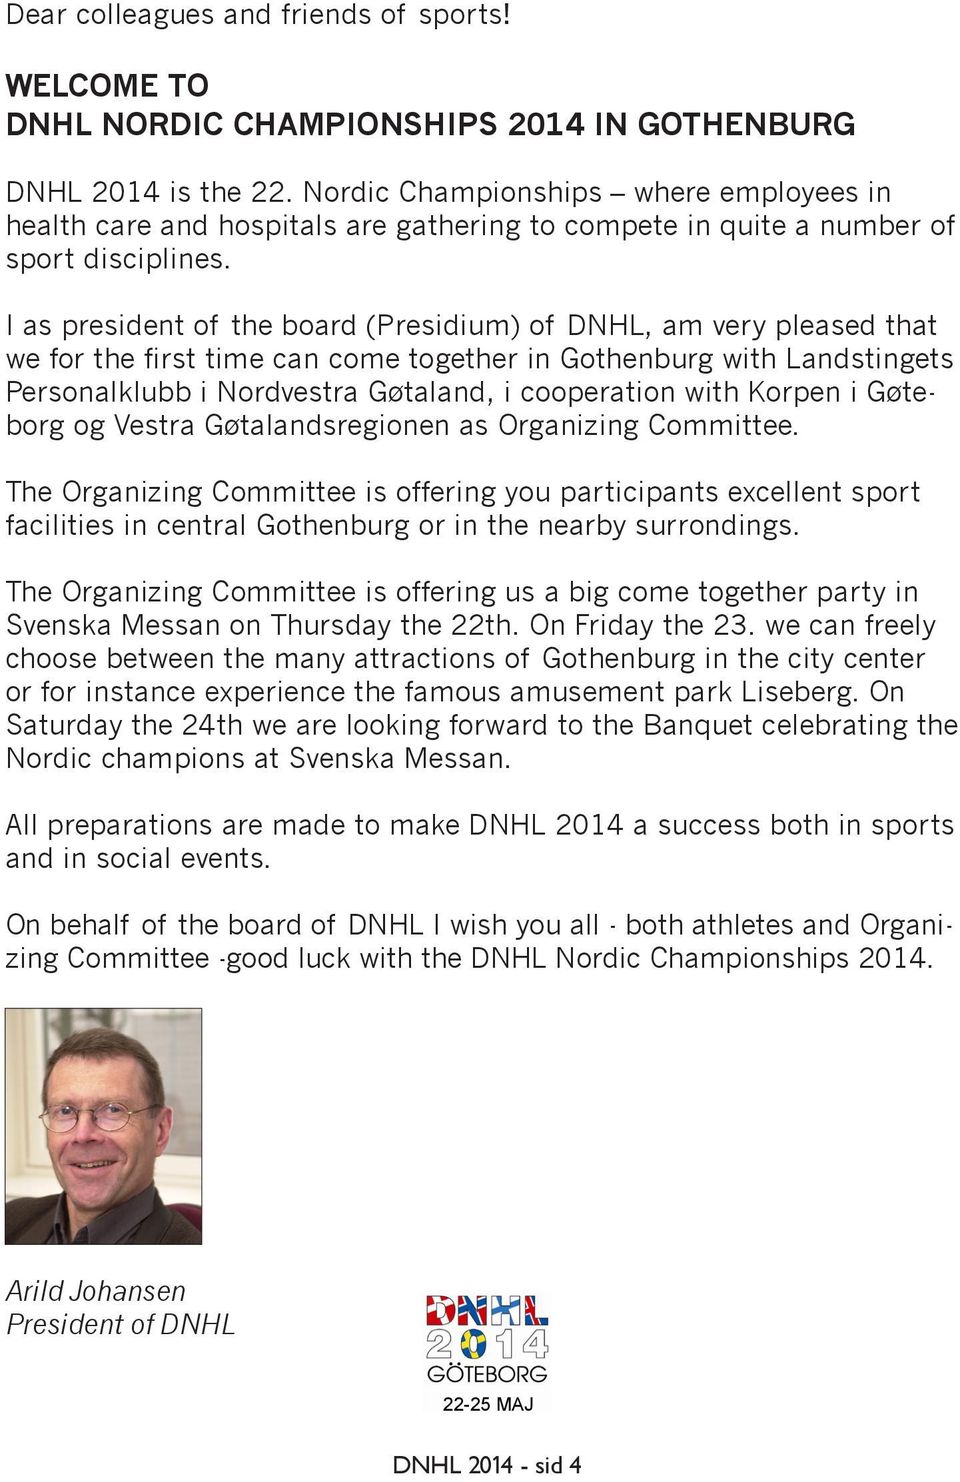 I as president of the board (Presidium) of DNHL, am very pleased that we for the first time can come together in Gothenburg with Landstingets Personalklubb i Nordvestra Gøtaland, i cooperation with